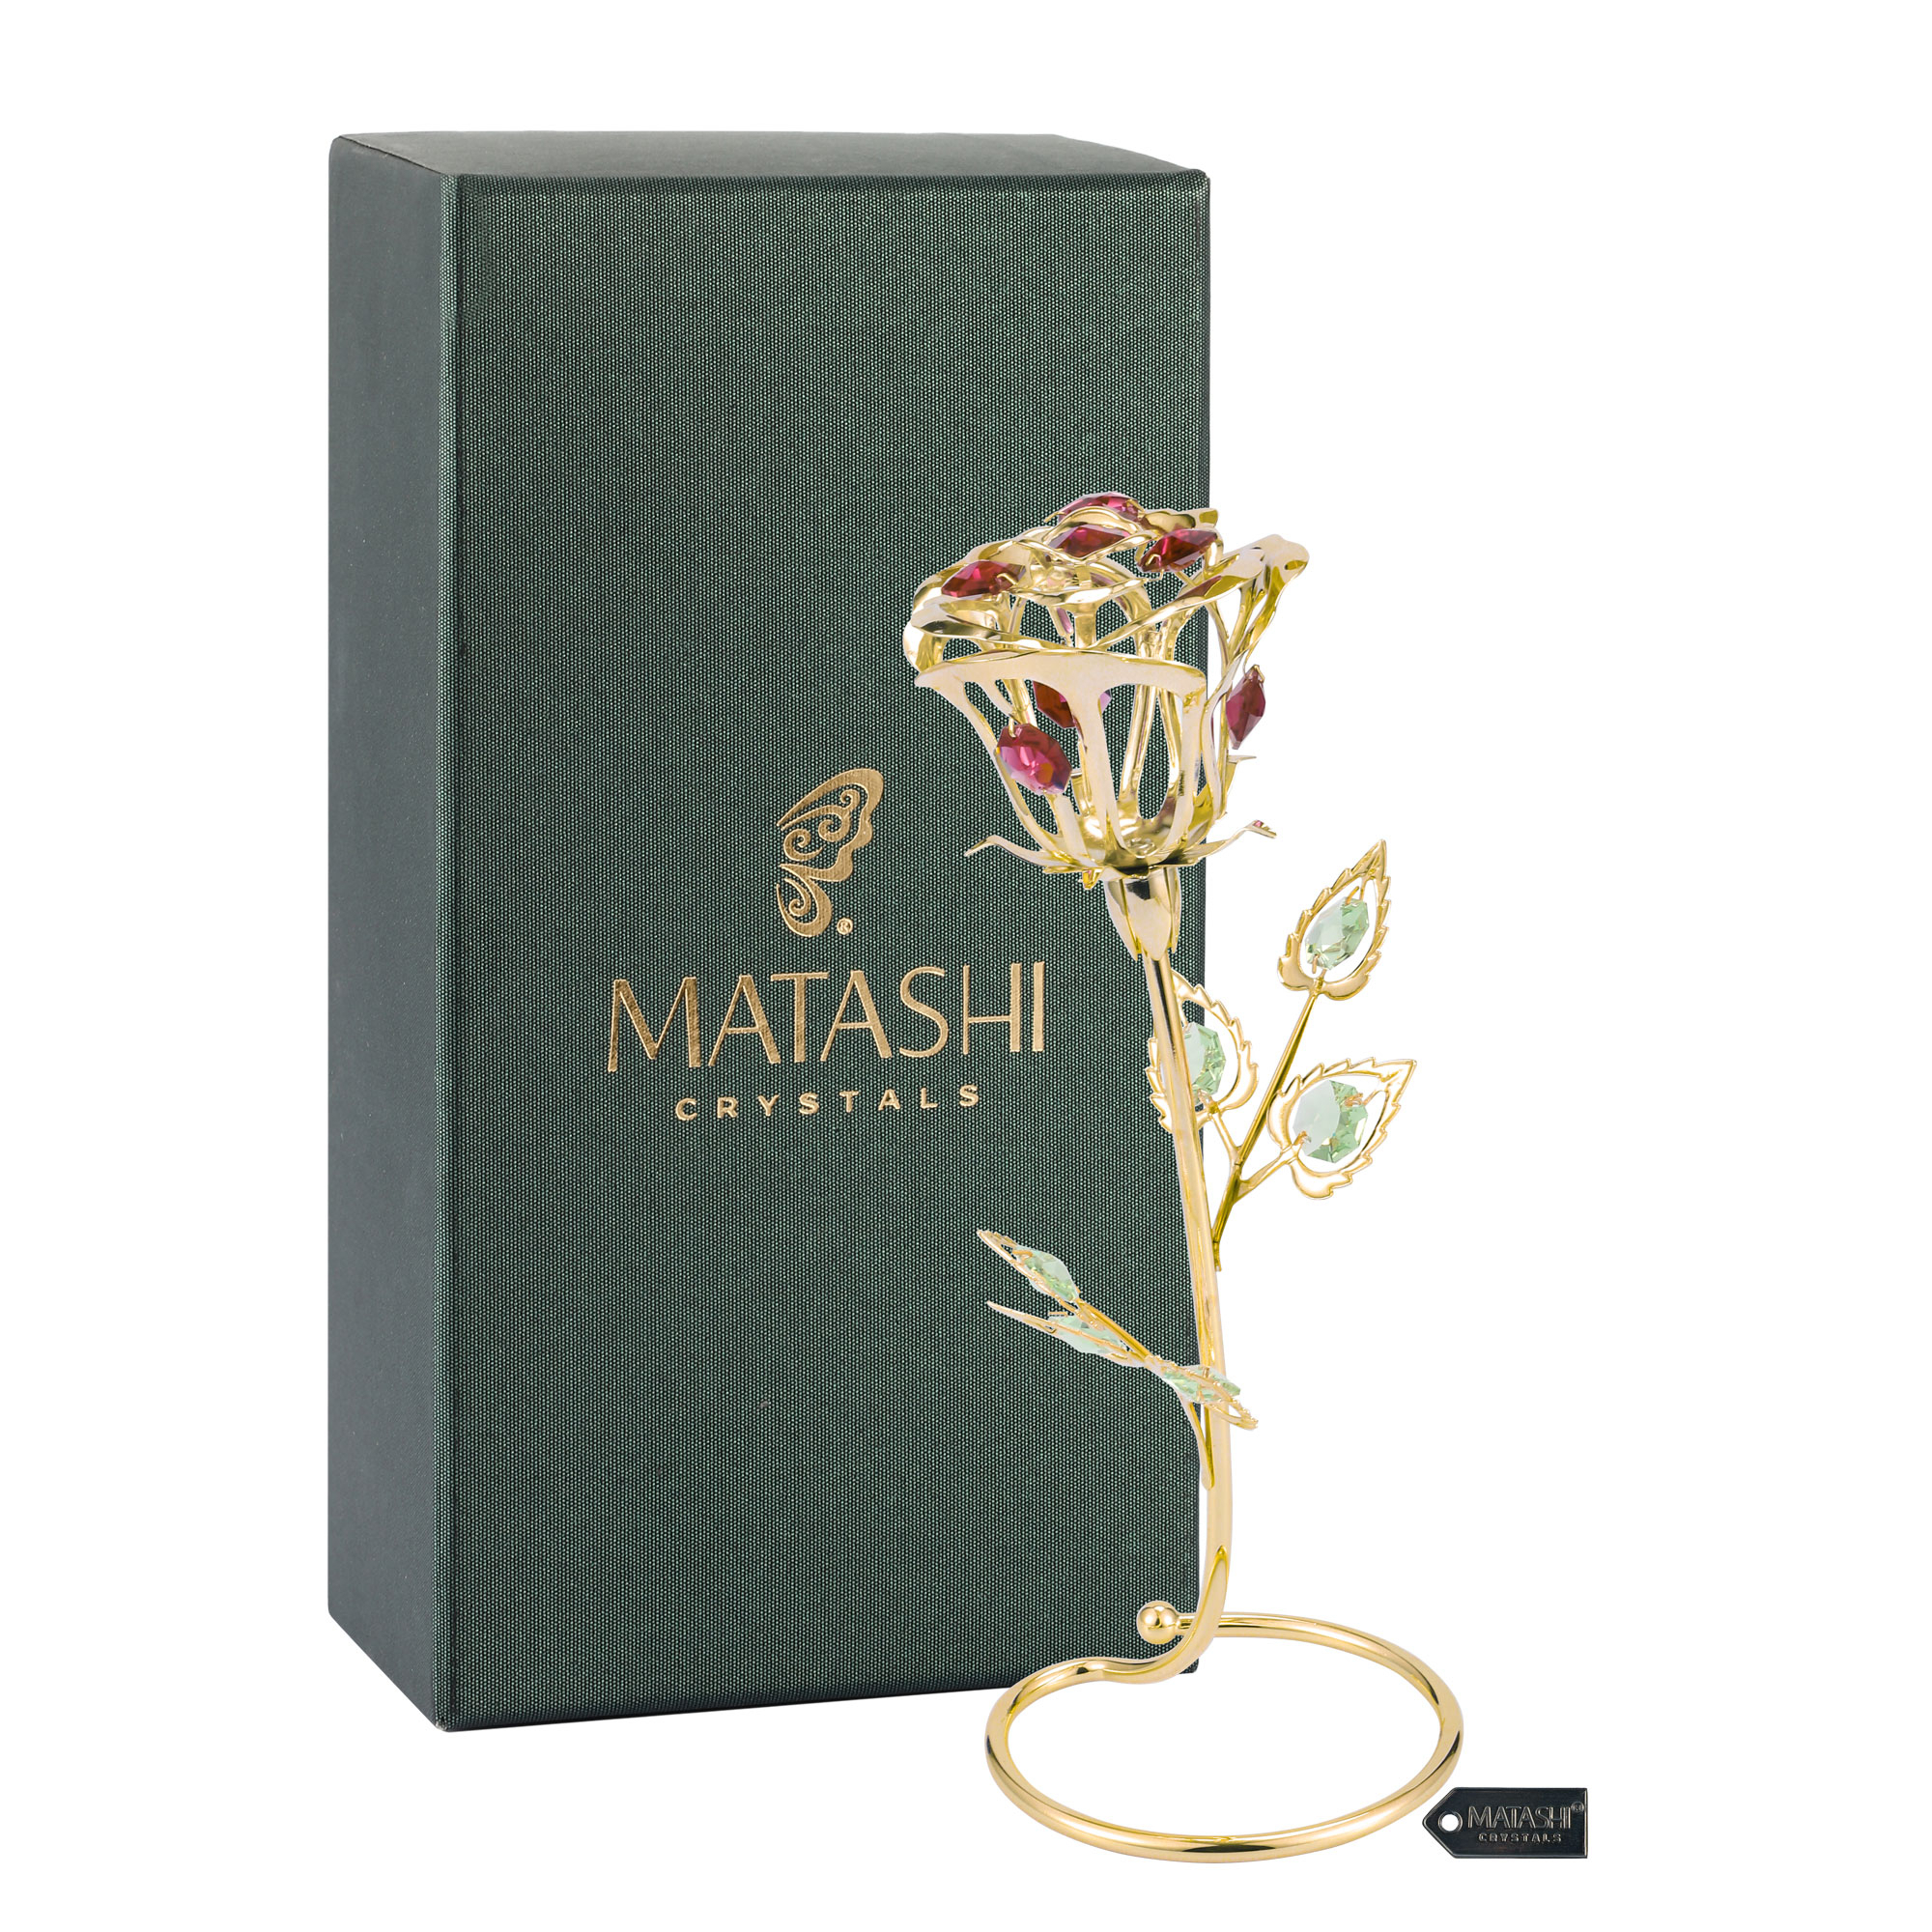 24K Gold Plated Rose Flower Tabletop Ornament W/ Red Pink & Green Matashi Crystals Metal Floral Arrangement Decorative Office